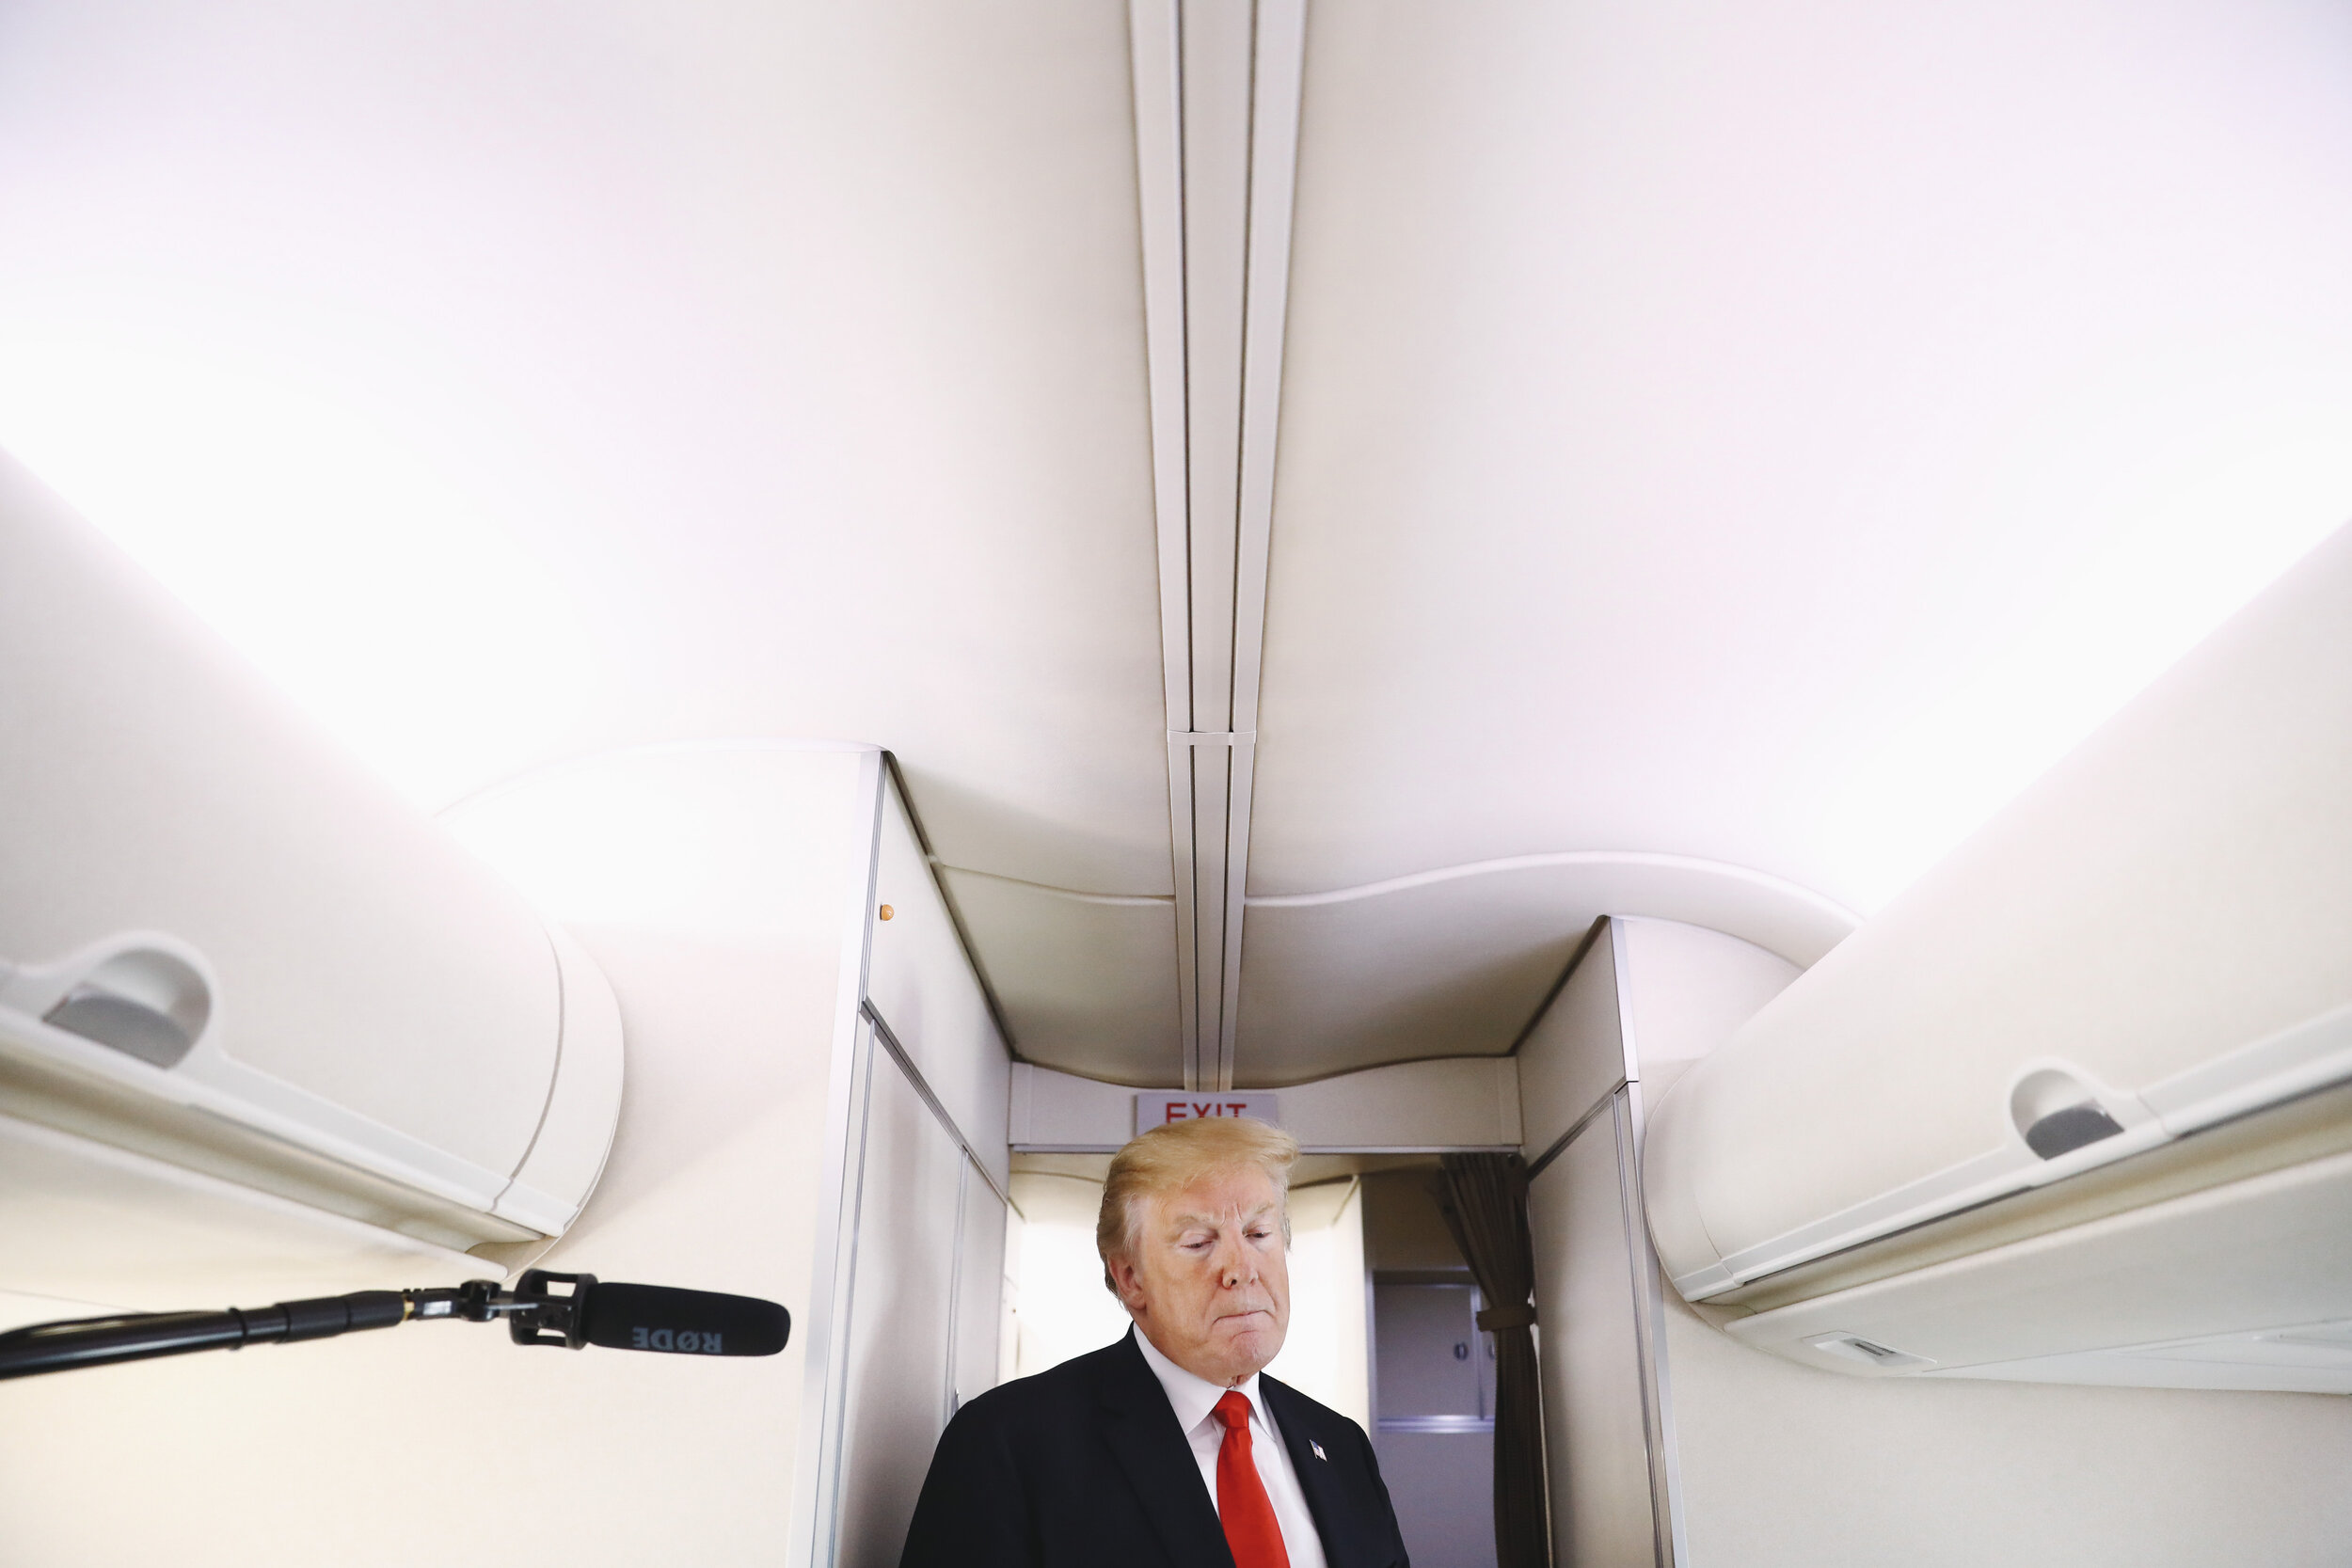   President Donald Trump, Air Force One. 2018  